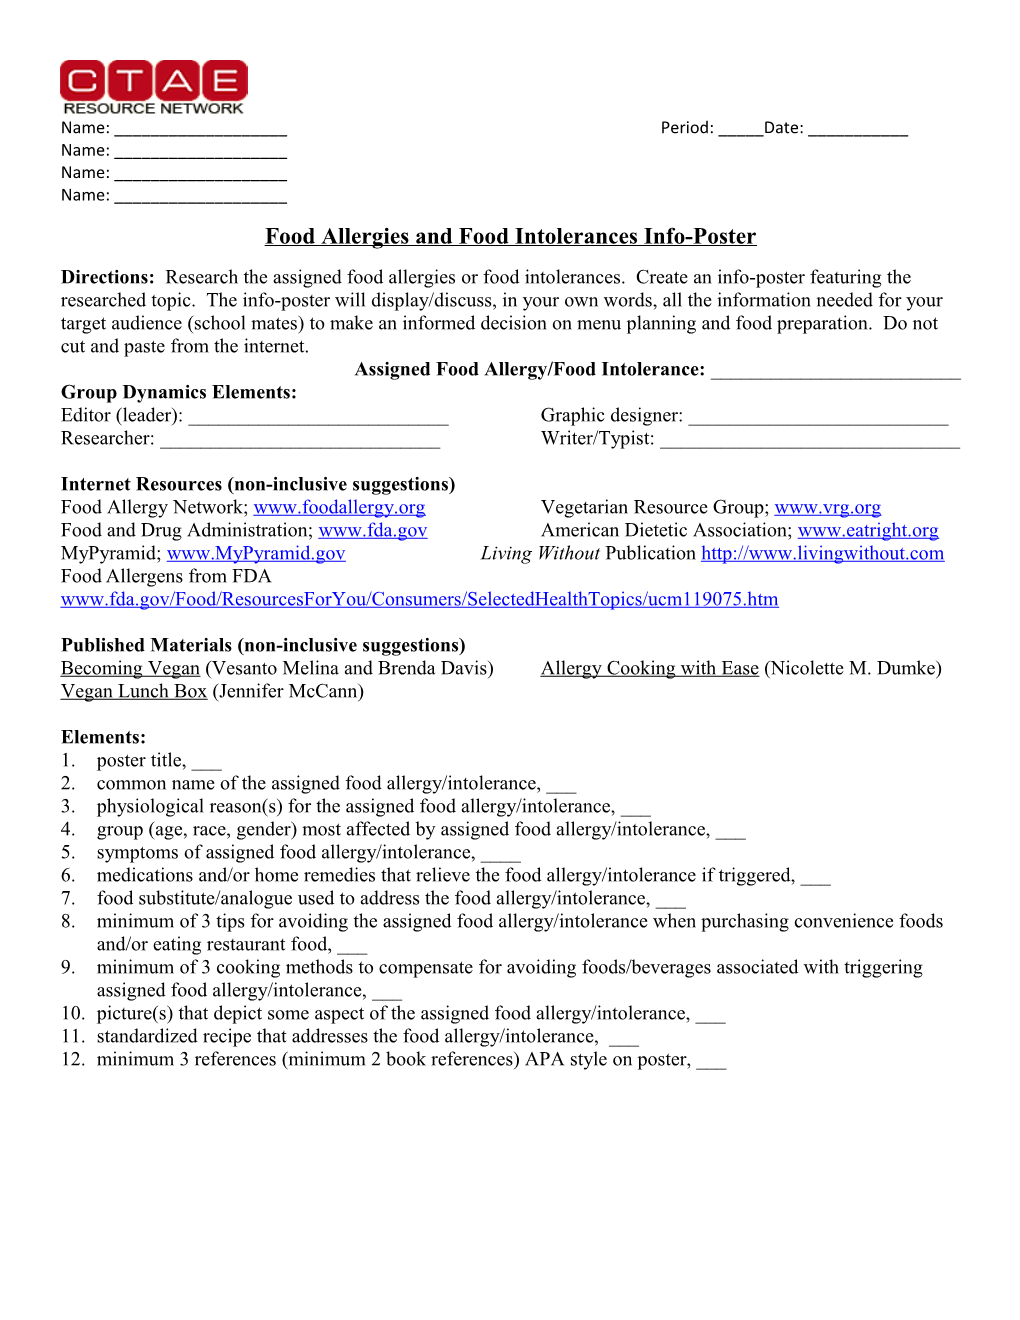 Food Allergies and Food Intolerances Info-Poster